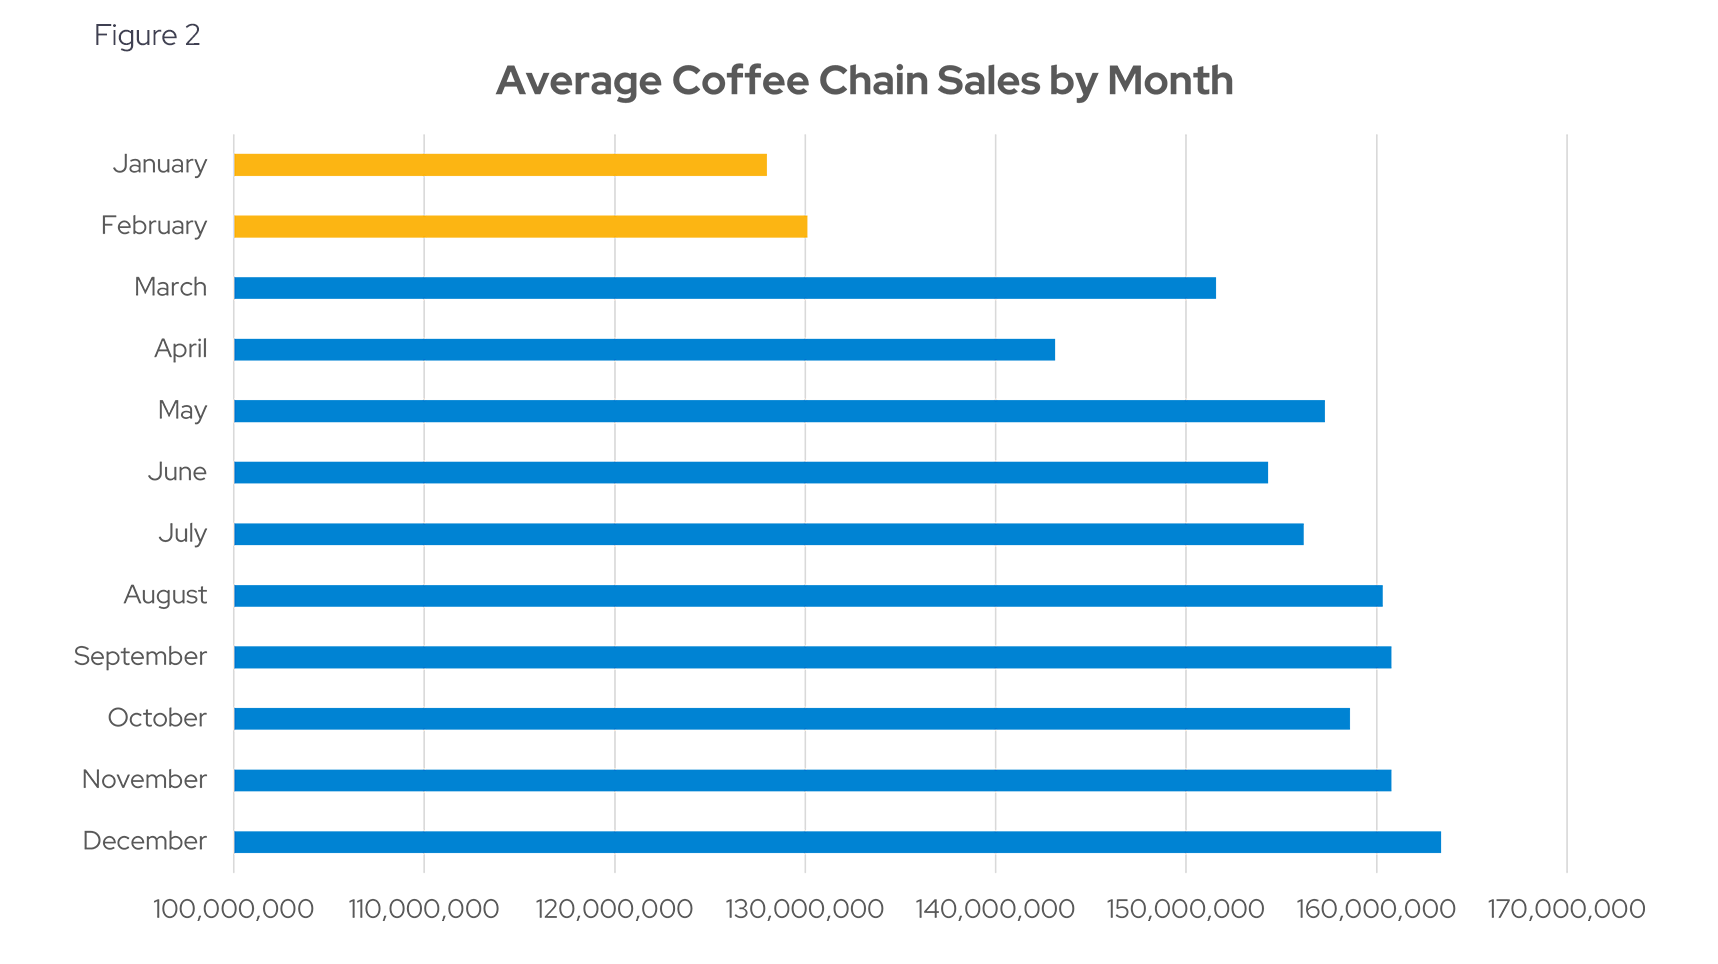 Average Coffee Chain Sales by Month